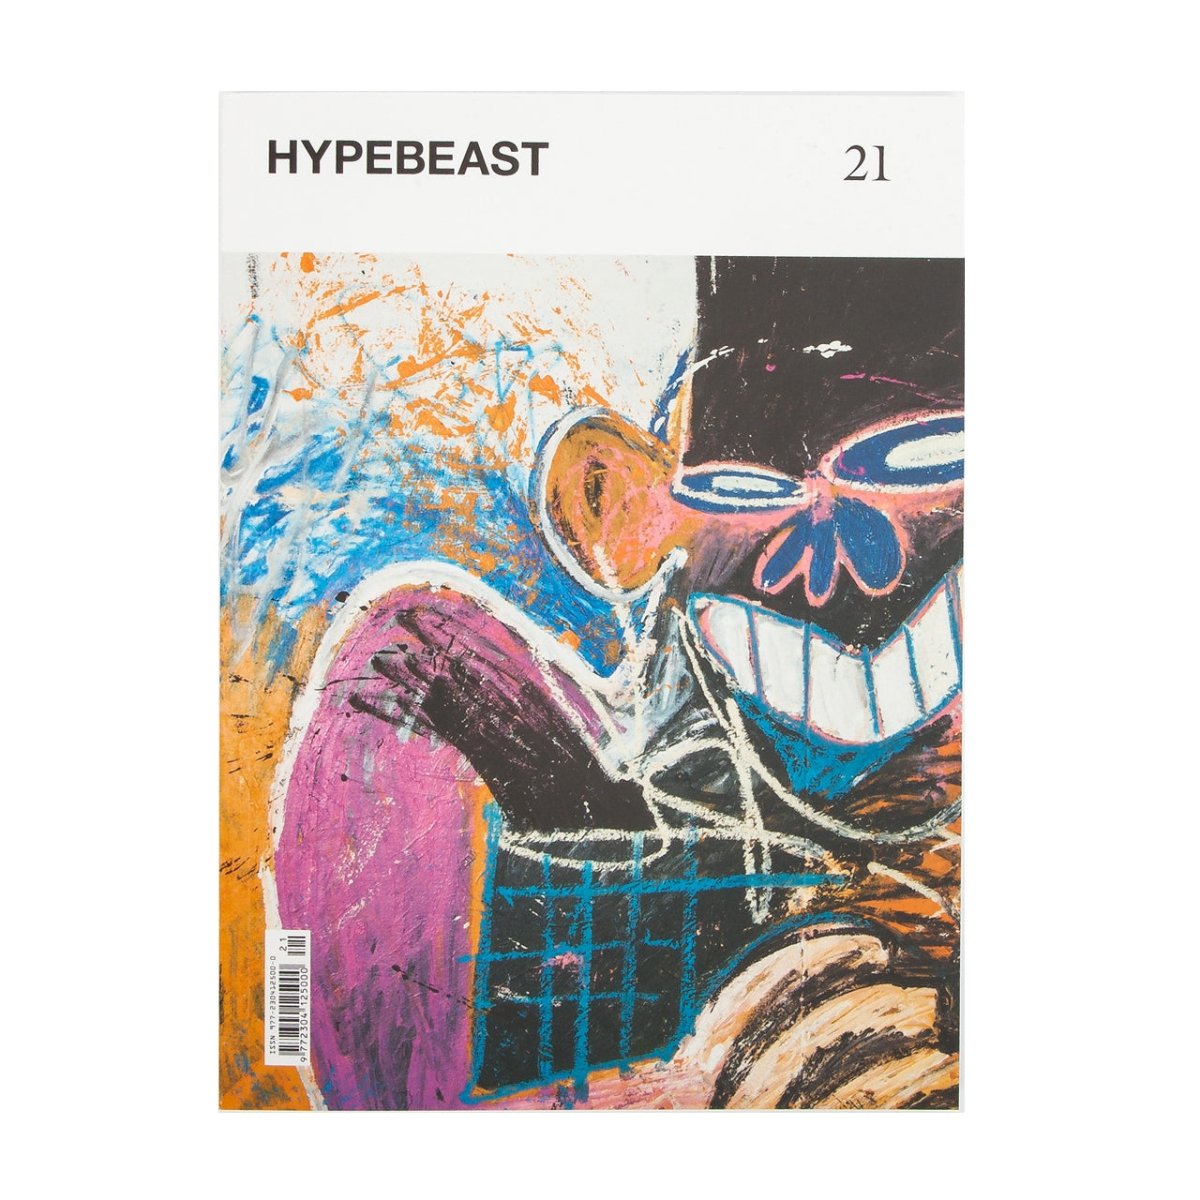 Image of HYPEBEAST Magazine Issue 21: The Renaissance Issue